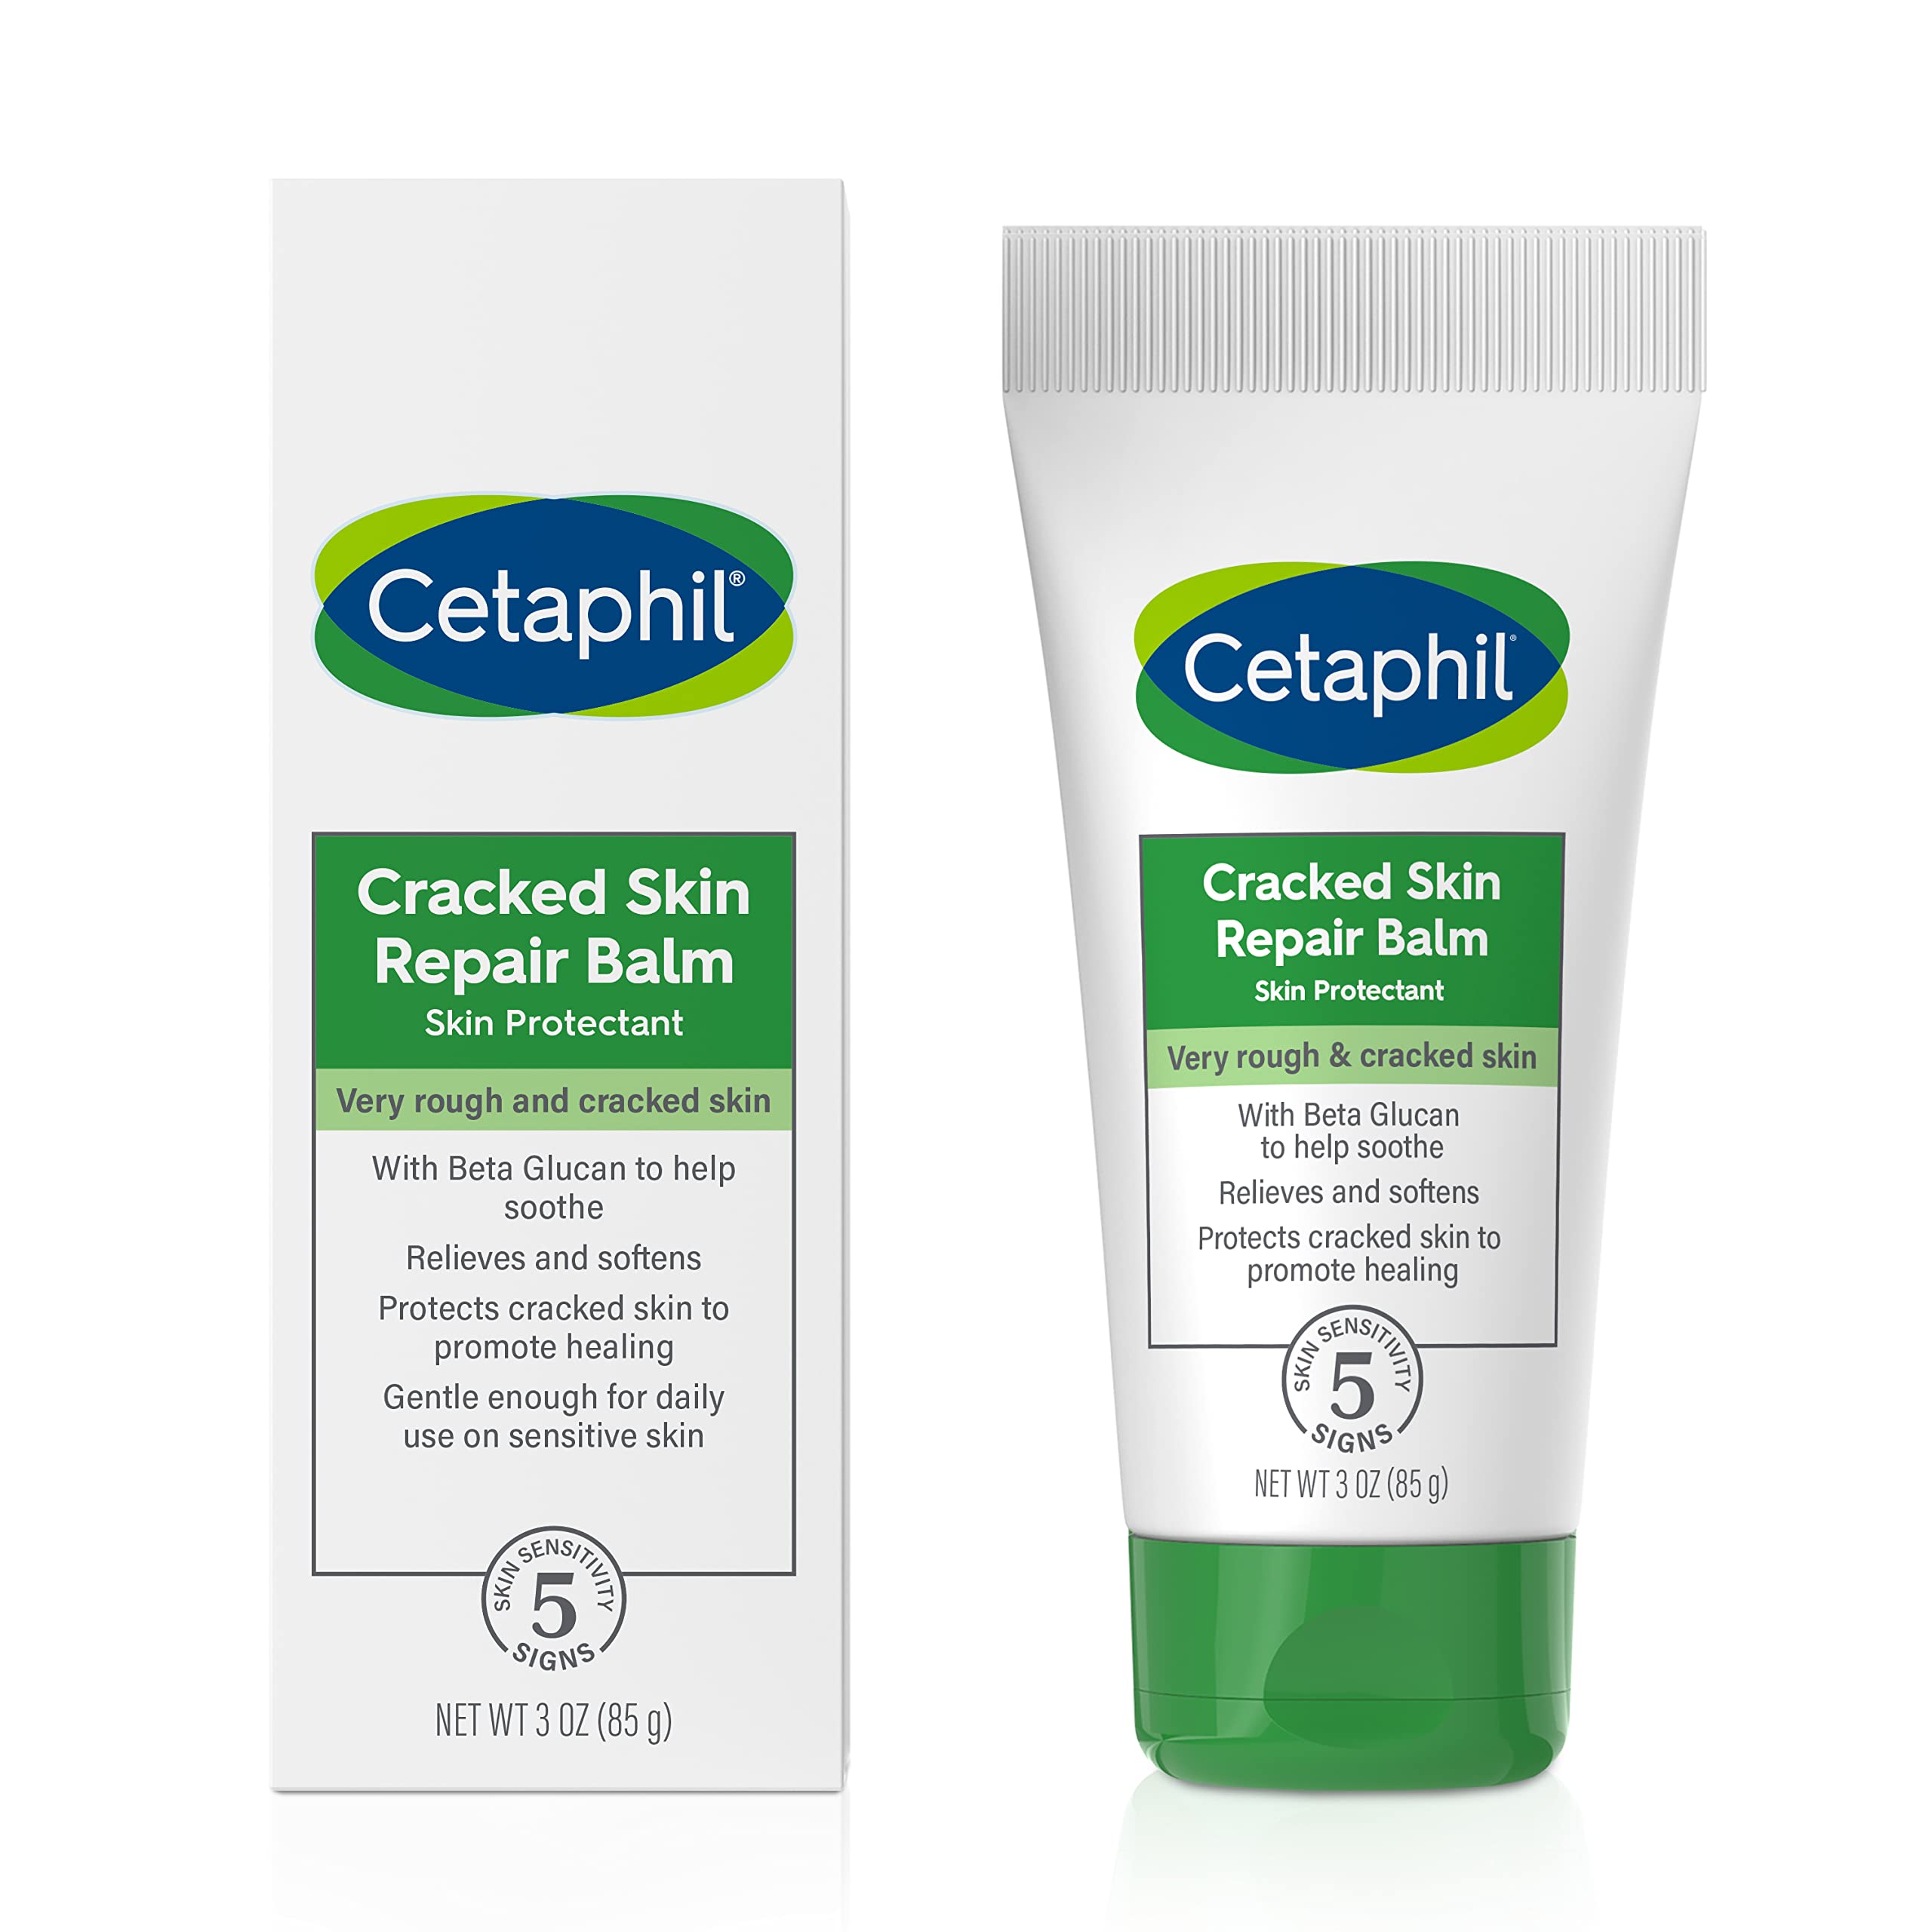 CETAPHIL Cracked Skin Repair Balm, 3 oz, For Very Rough & Cracked, Sensitive Skin, Protects, Soothes & Restores Deeper Cracks, Hypoallergenic, Fragrance Free, (Packaging May Vary)